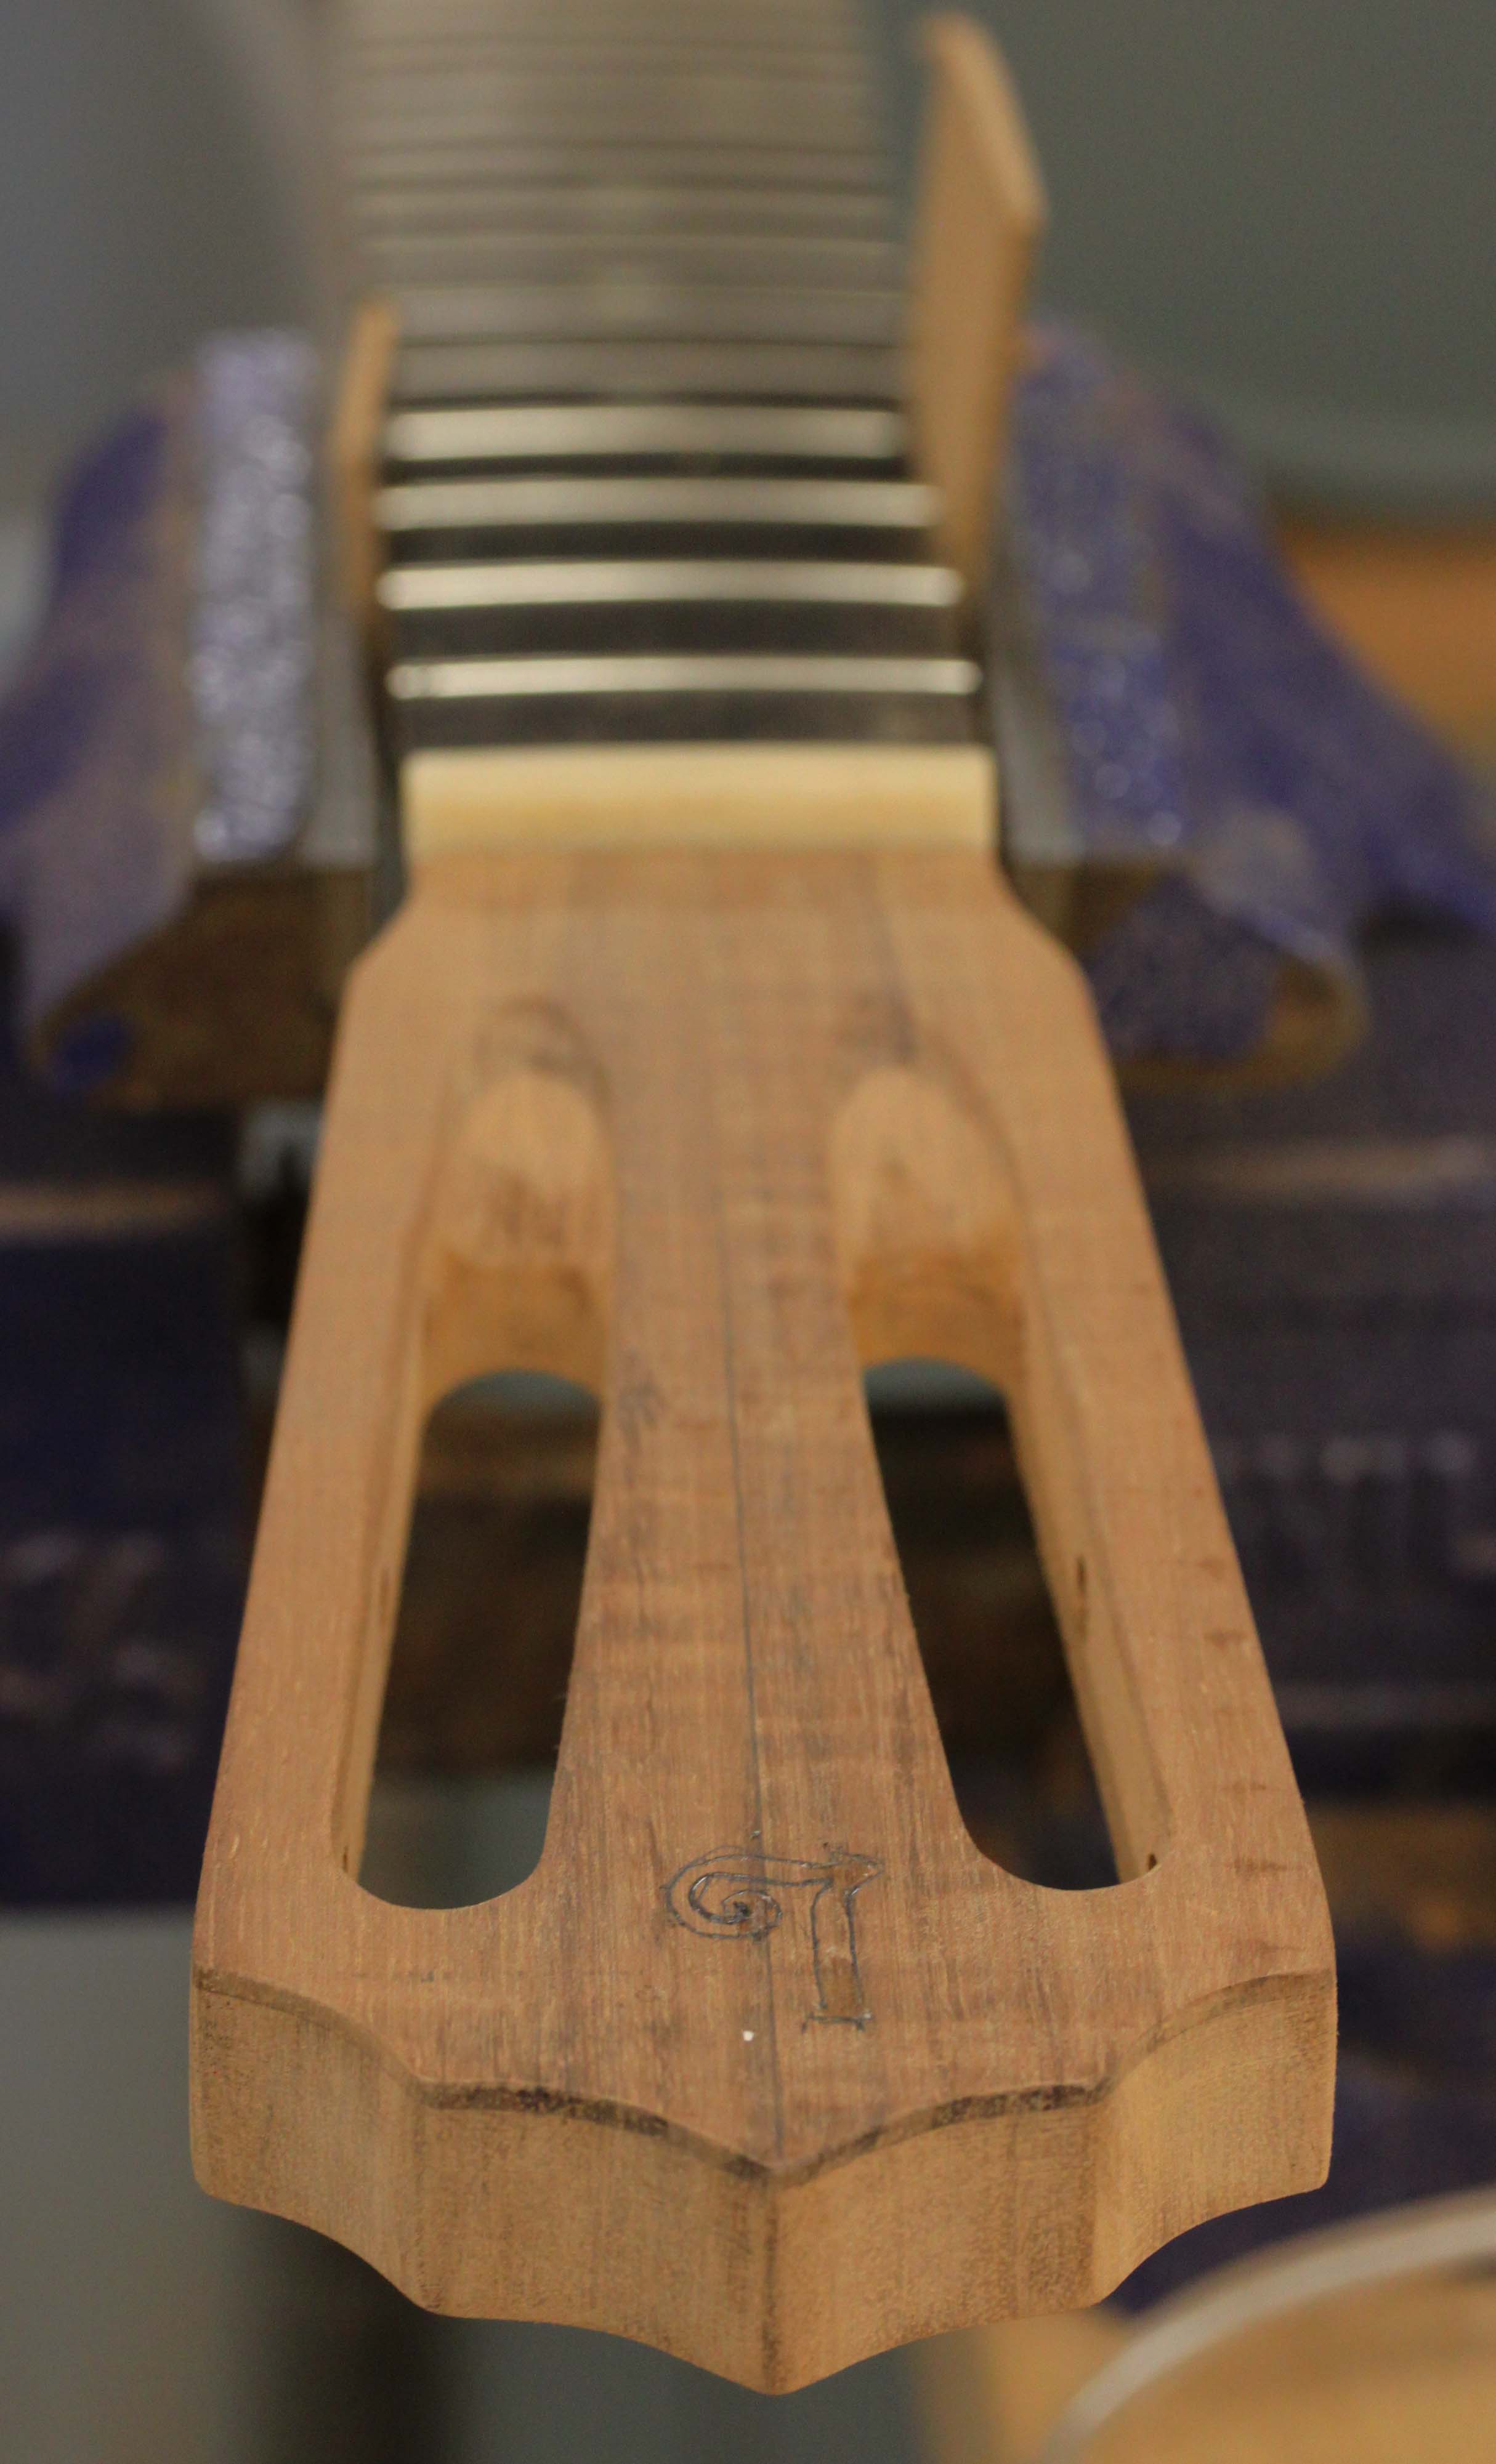 Handcrafted koa parlor guitar - in construction